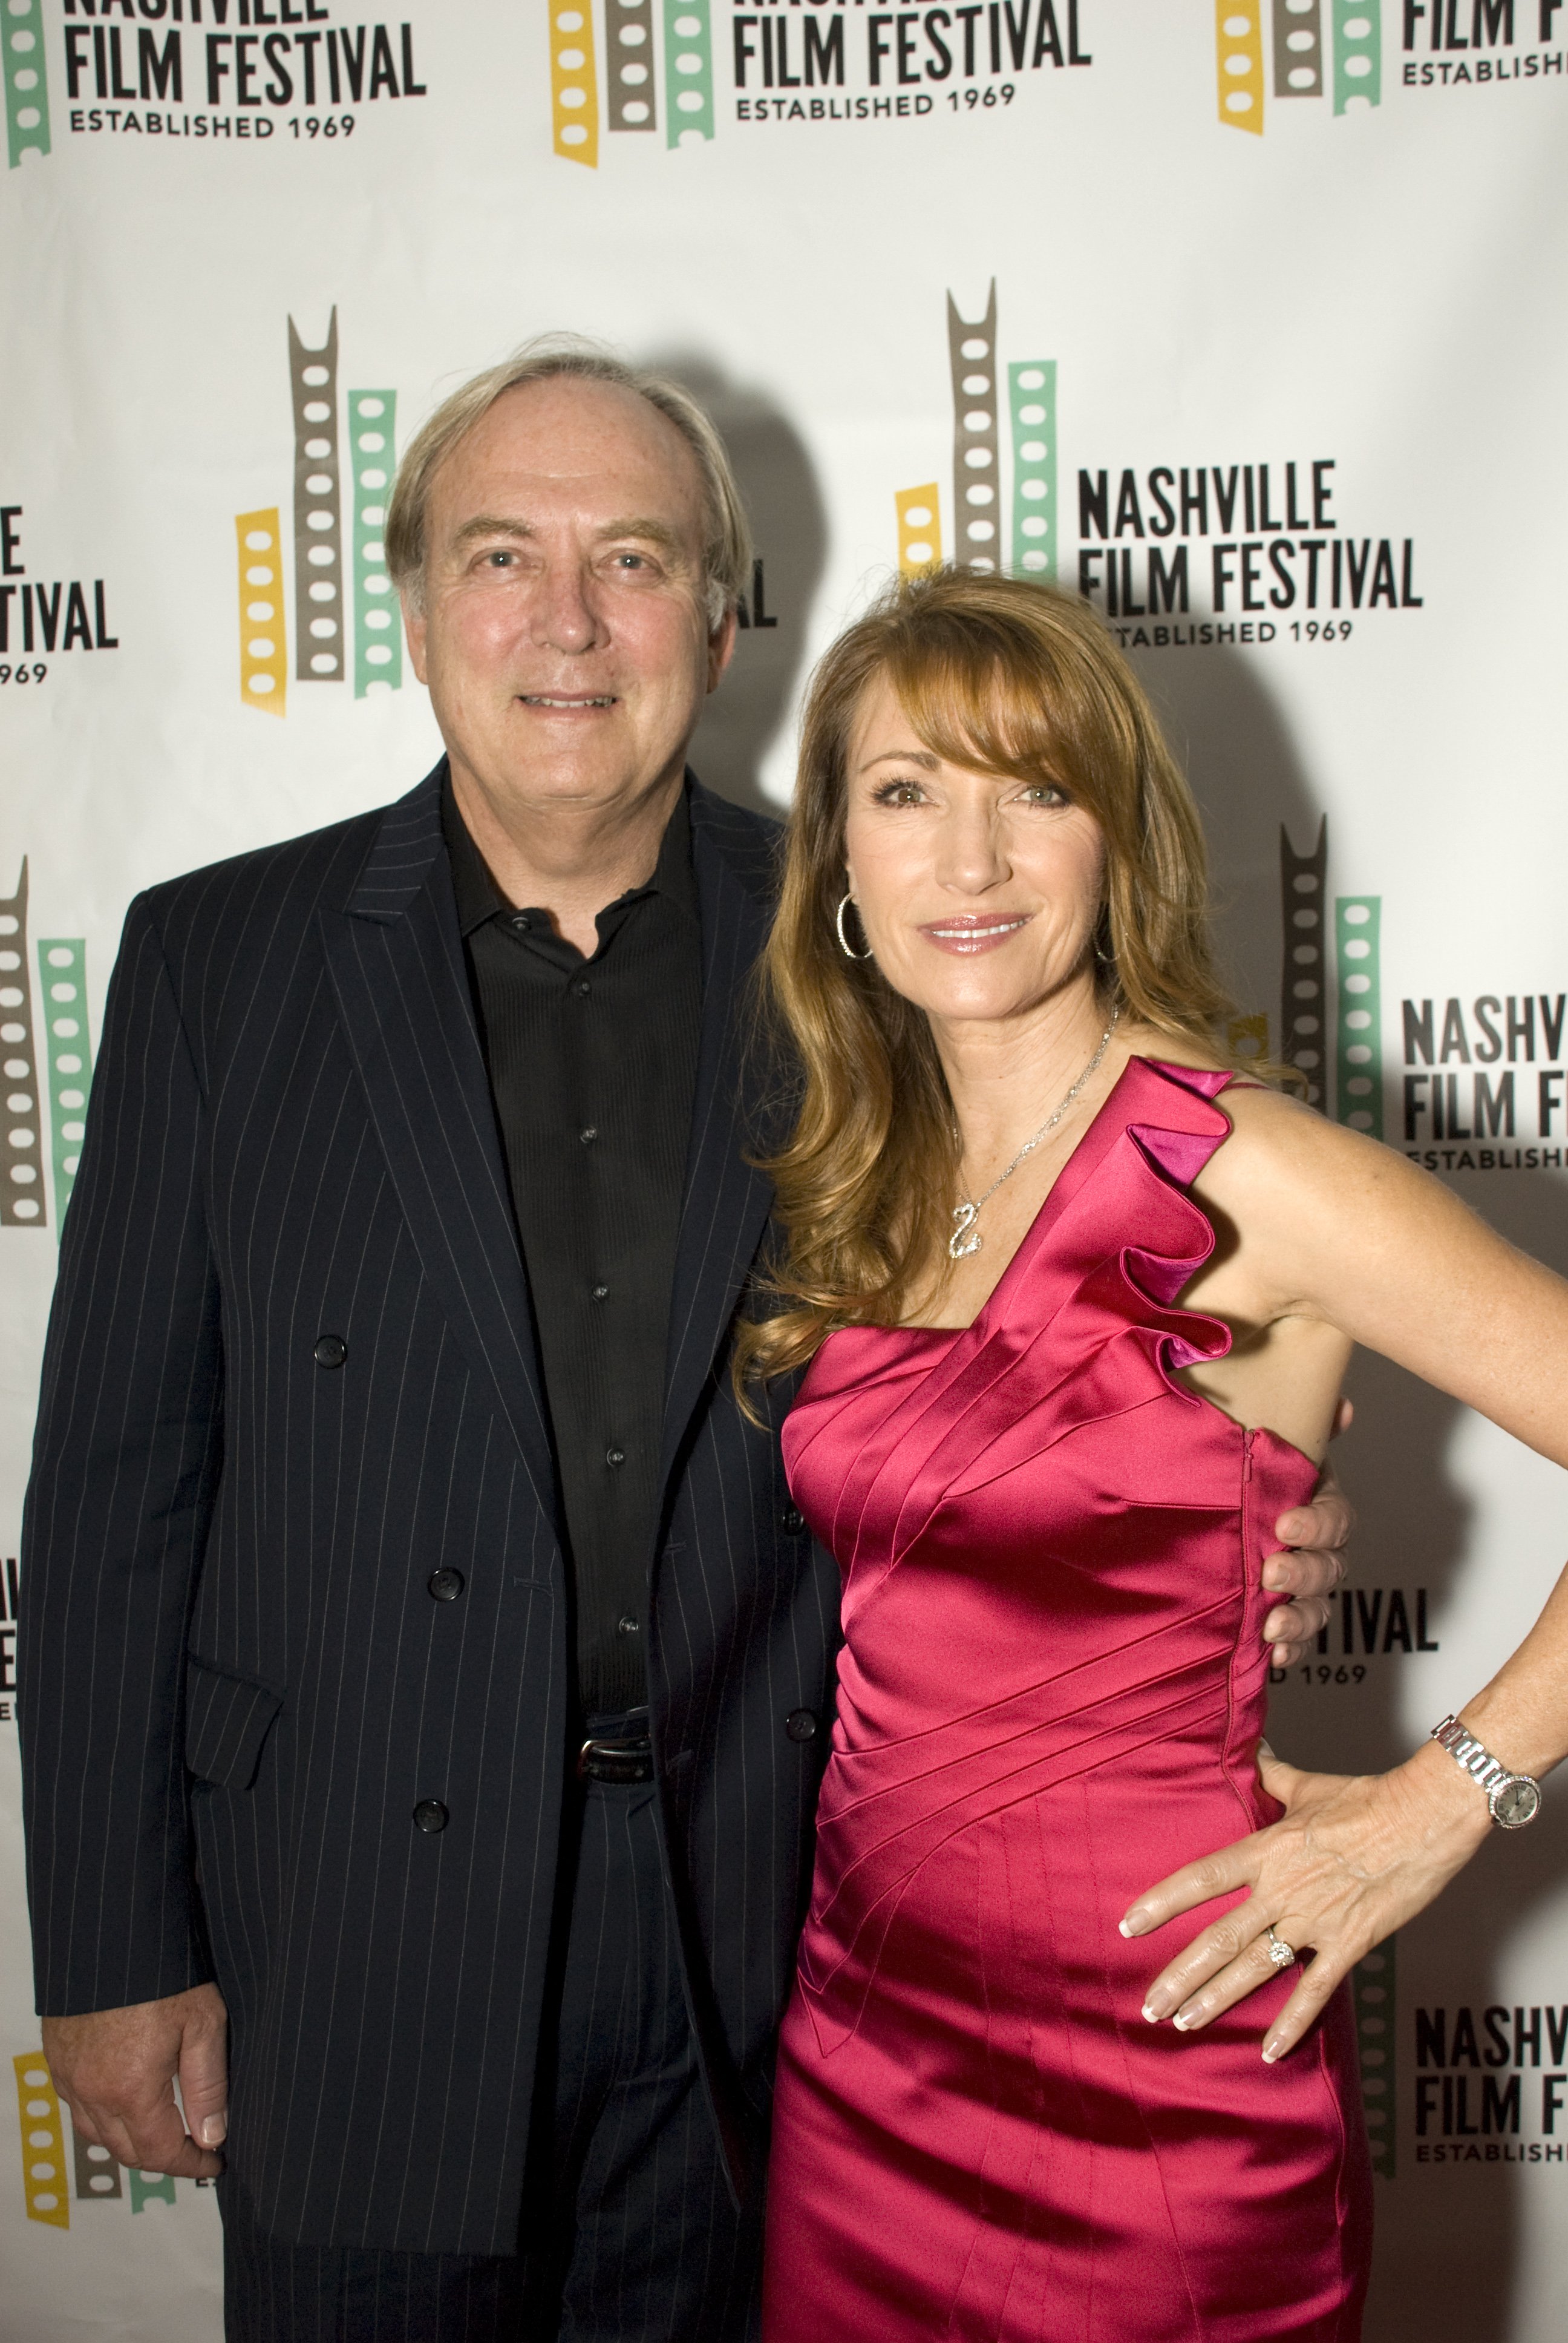 Jane Seymour and James Keach pose at the 2010 Nashville Film Festival at Green Hills Regal Theater on April 15, 2010 in Nashville, Tennessee | Source: Getty Images